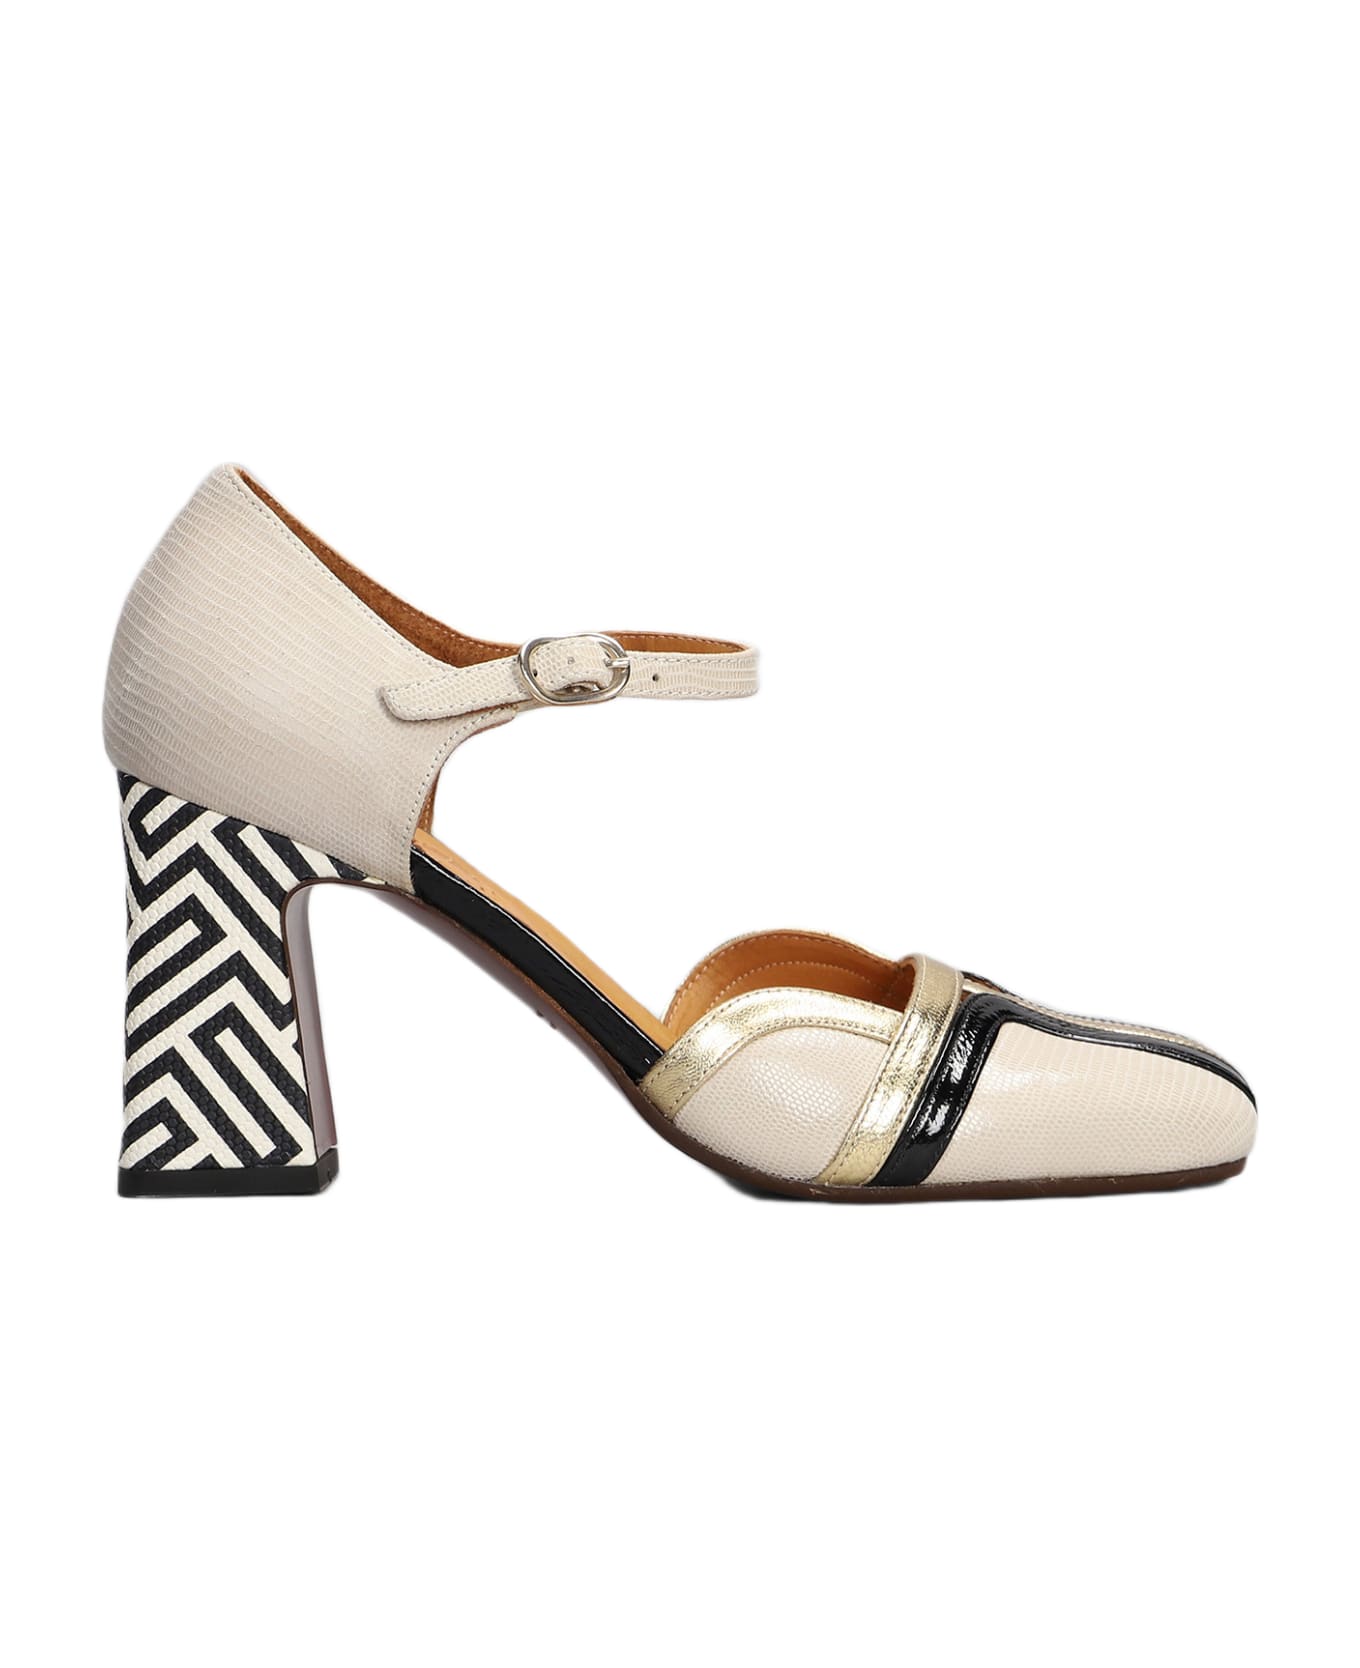 Chie Mihara Olali Pumps In Beige Leather - beige